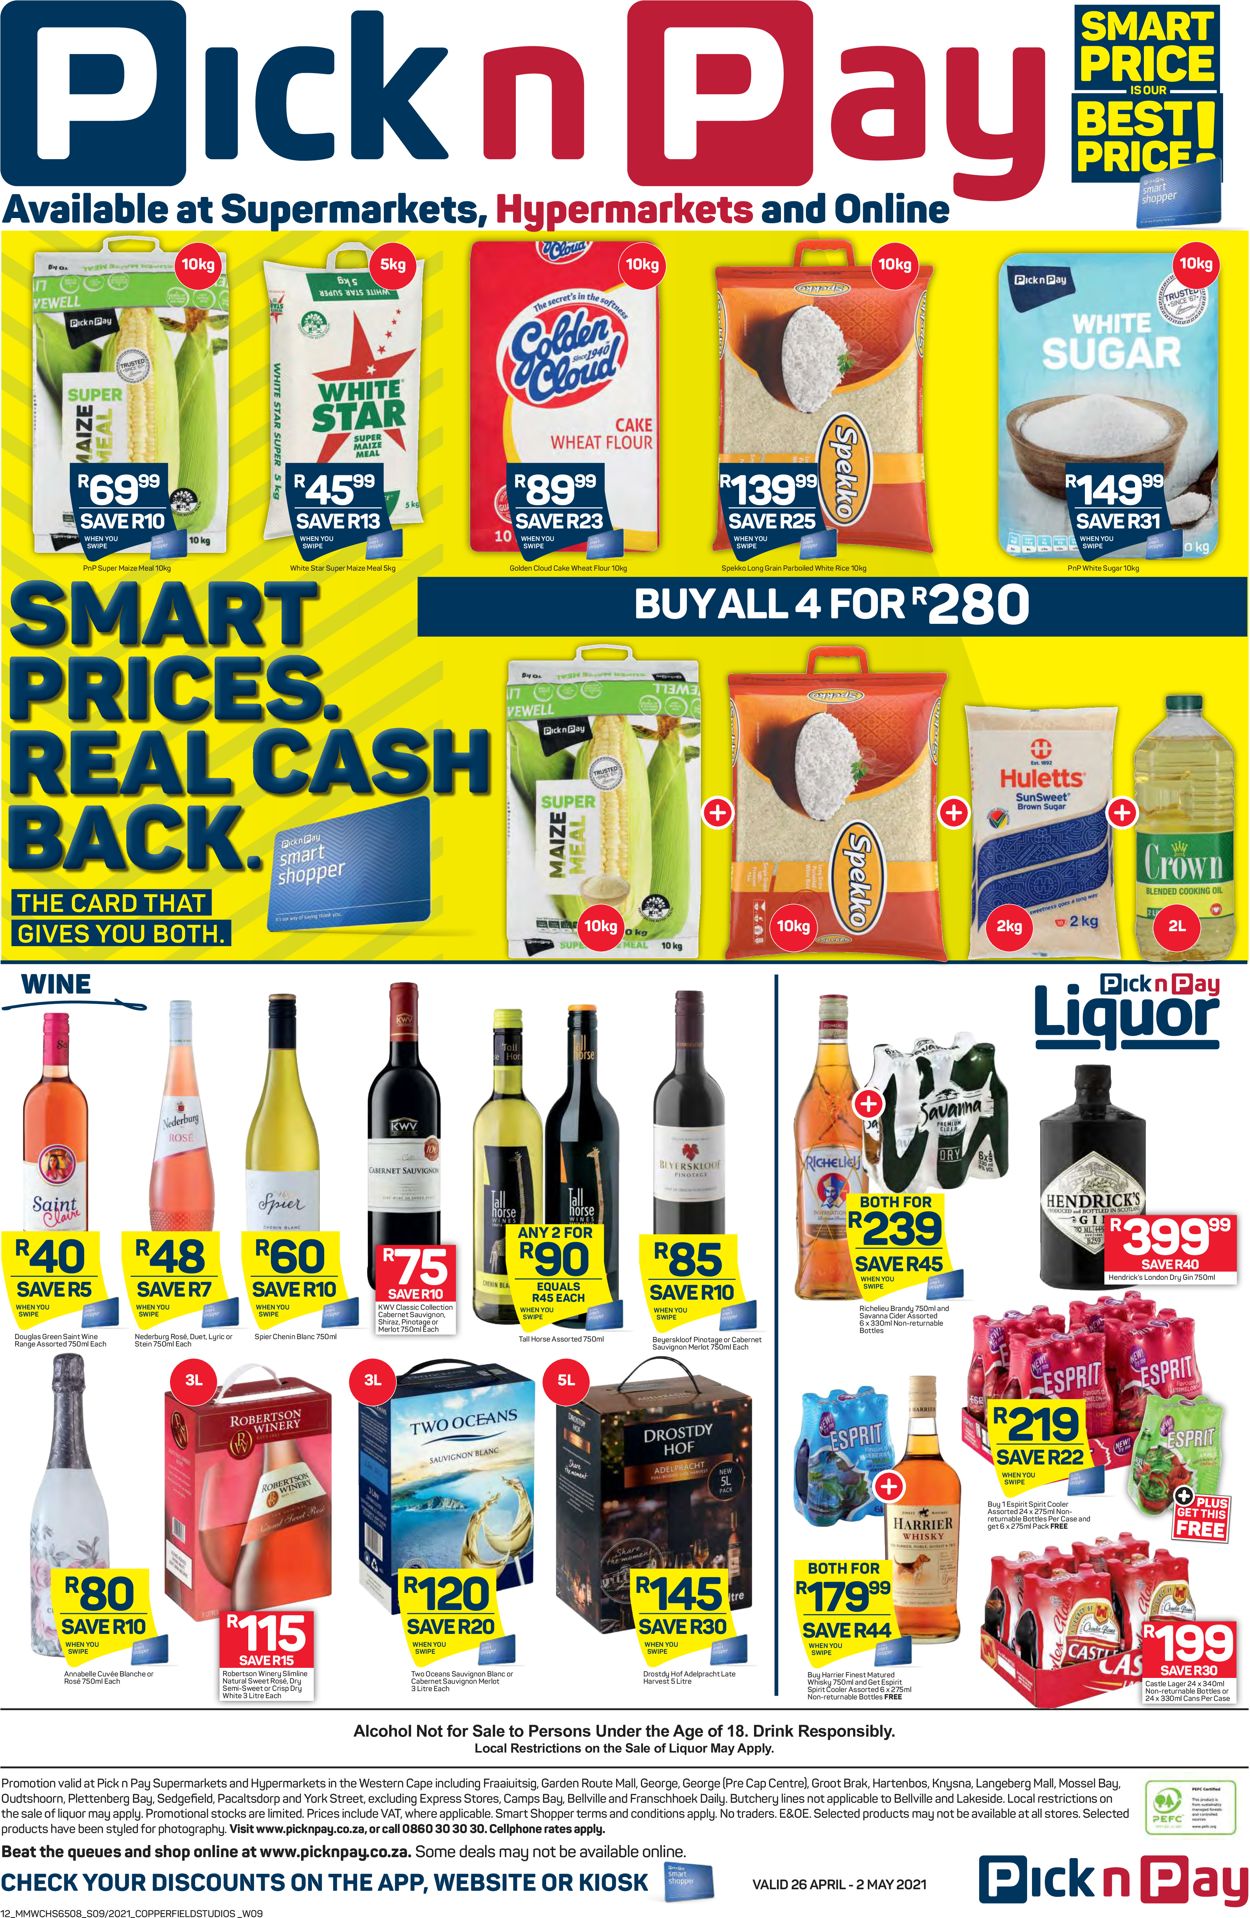 Pick n Pay Current catalogue 2021/04/26 2021/05/02 [12]